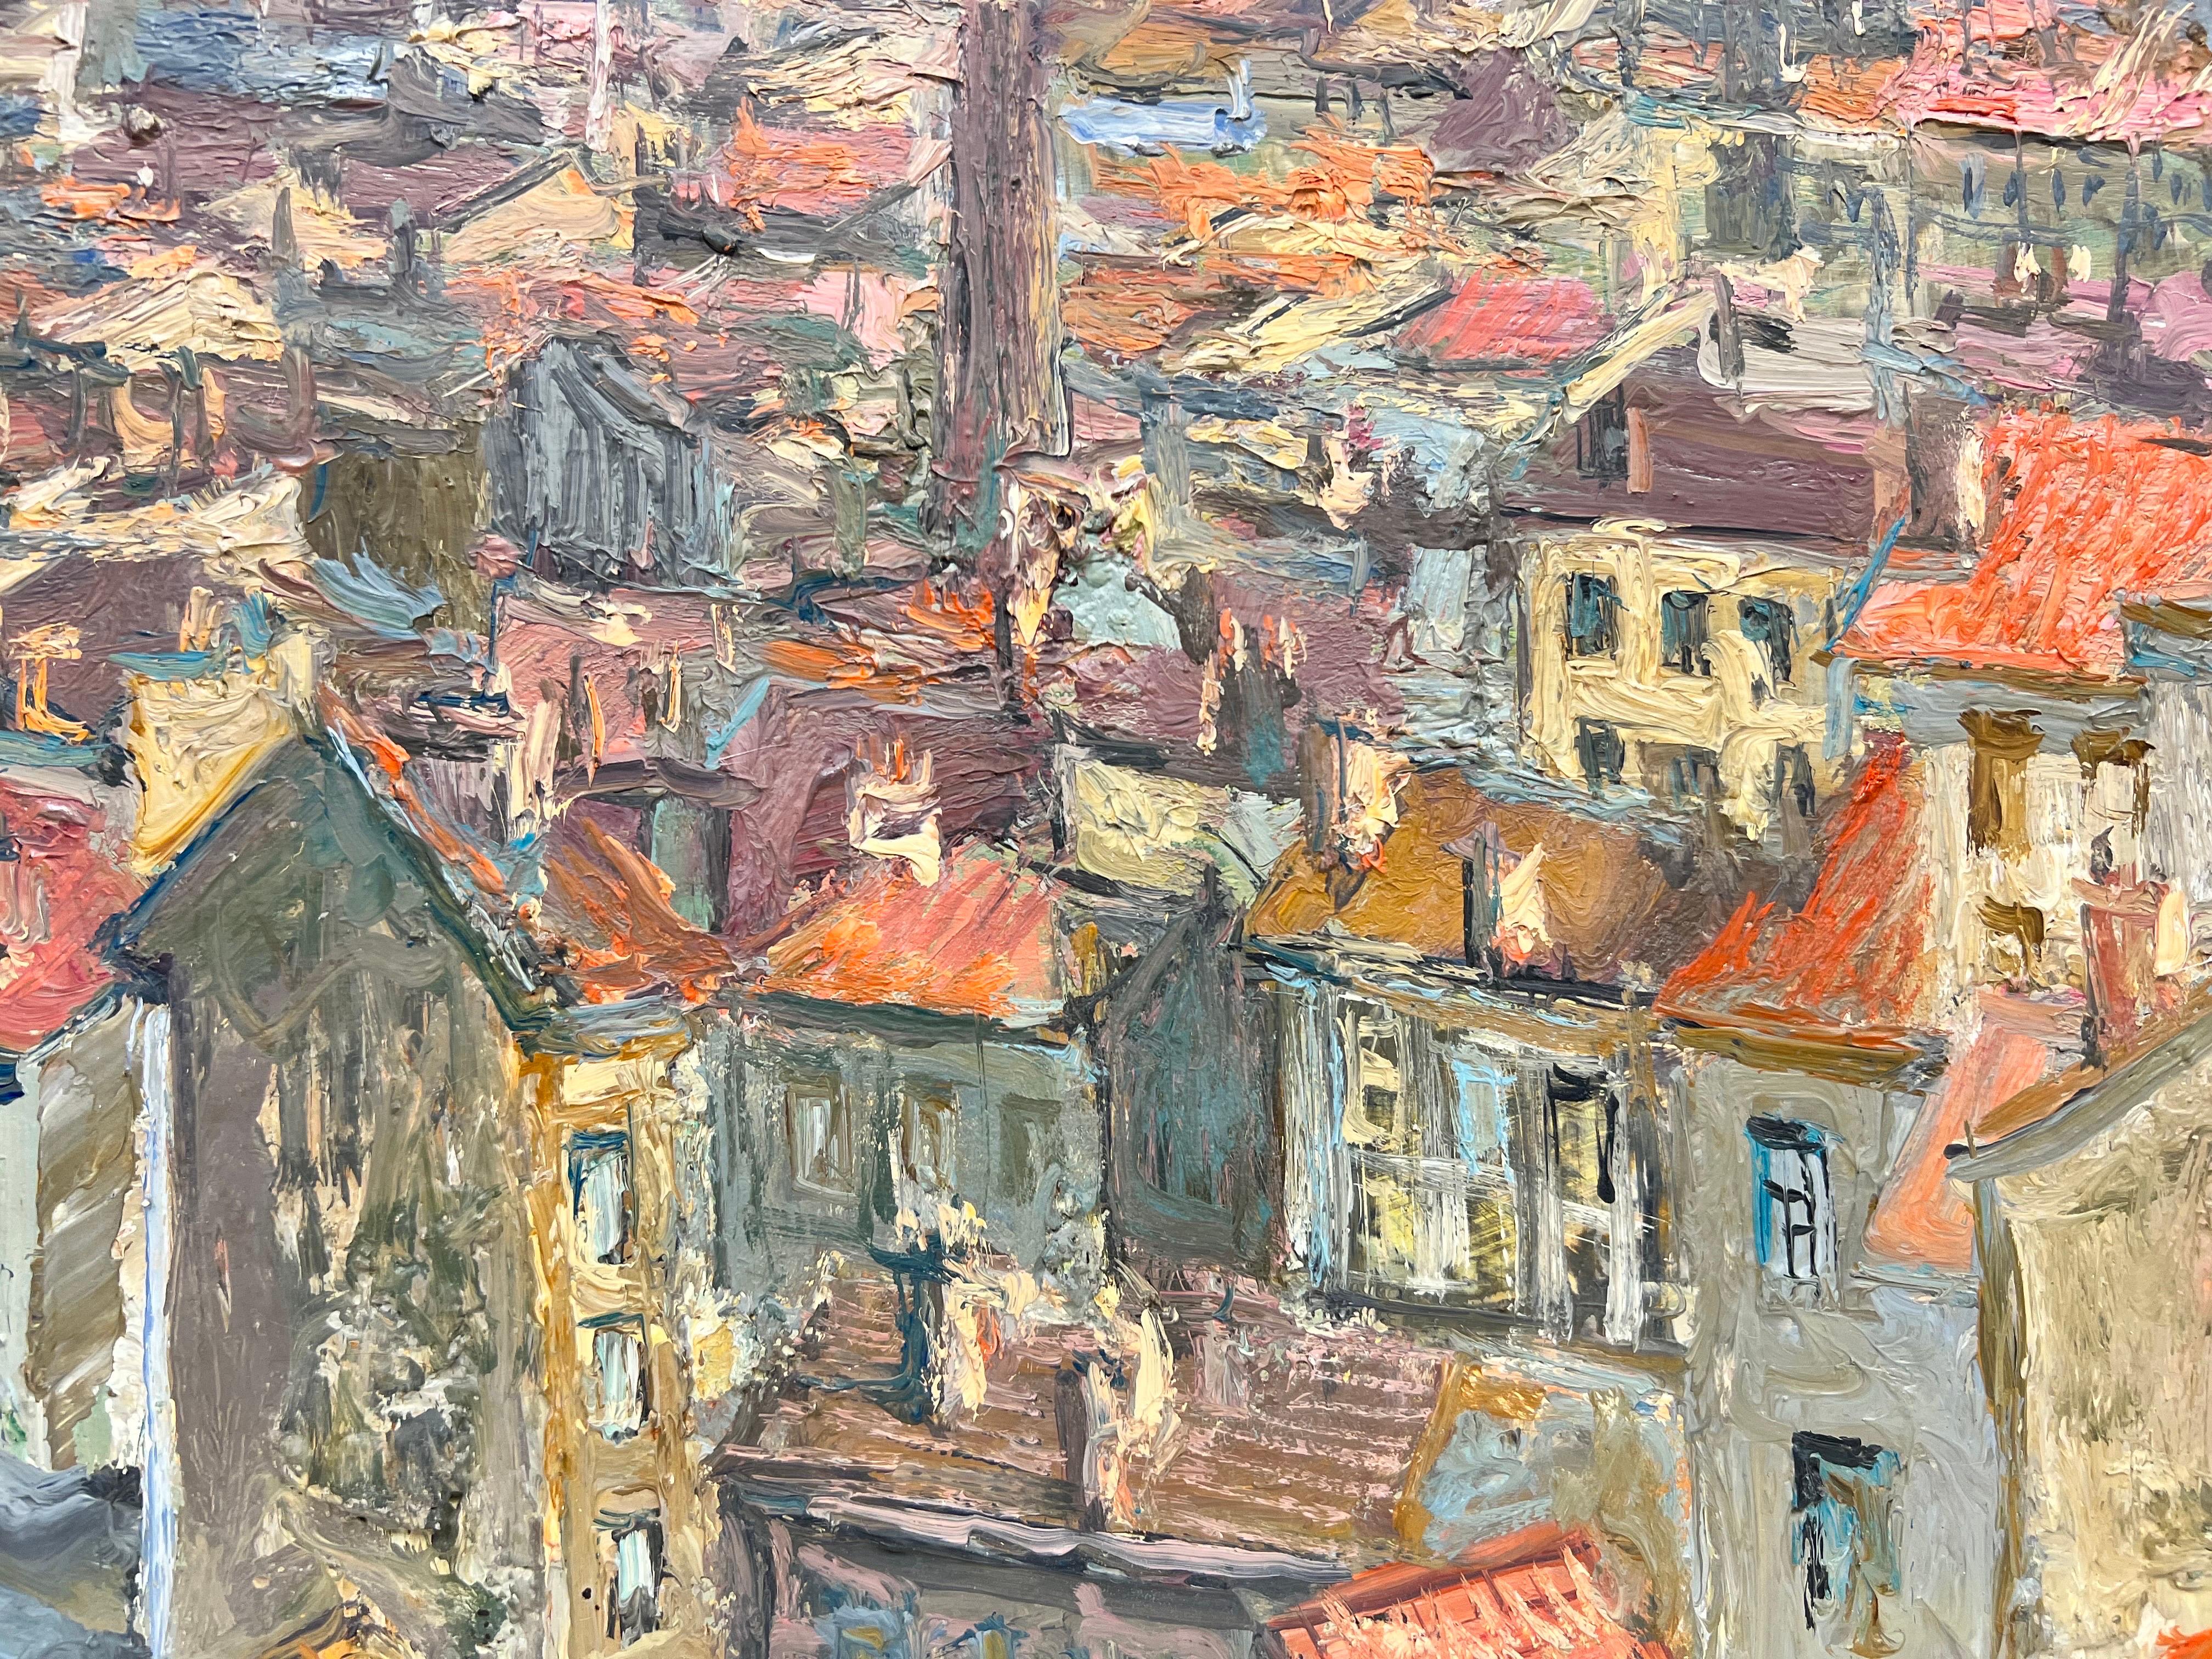 City Rooftops
French School, circa 1950's
oil on canvas
13 x 16 inches
provenance: private collection, Paris
The painting is in good and presentable condition.
